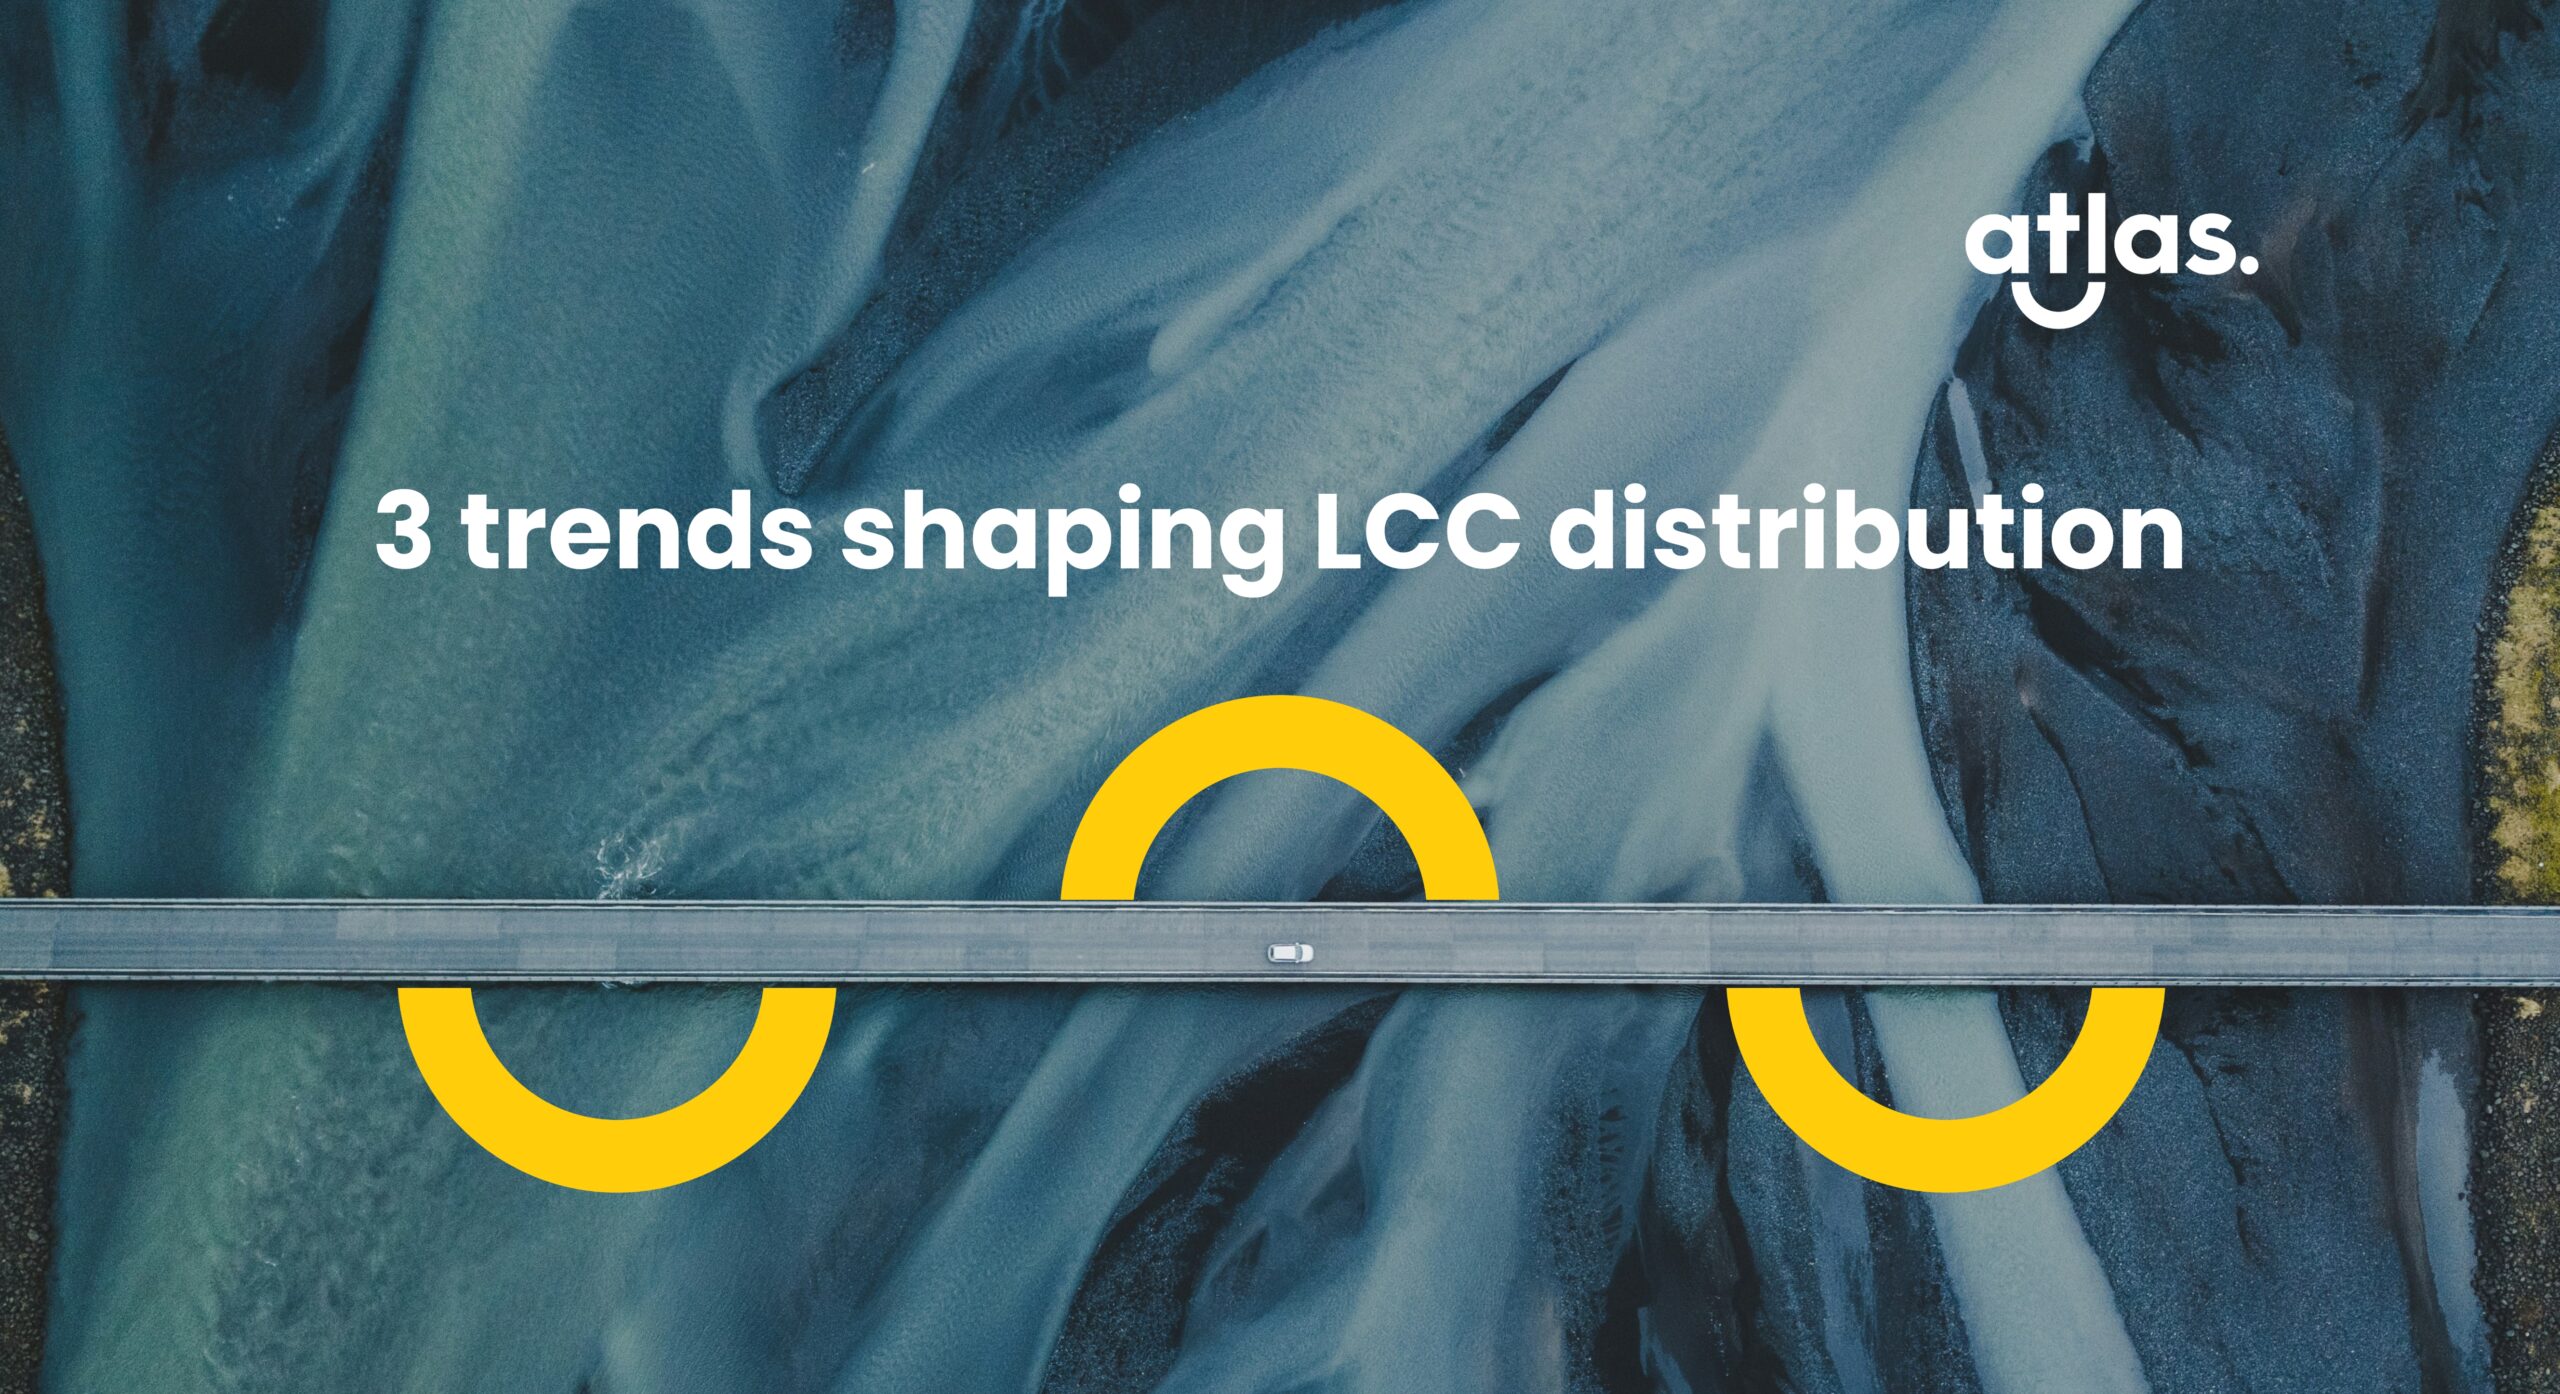 3 trends shaping LCC distribution: quality, data, and CX